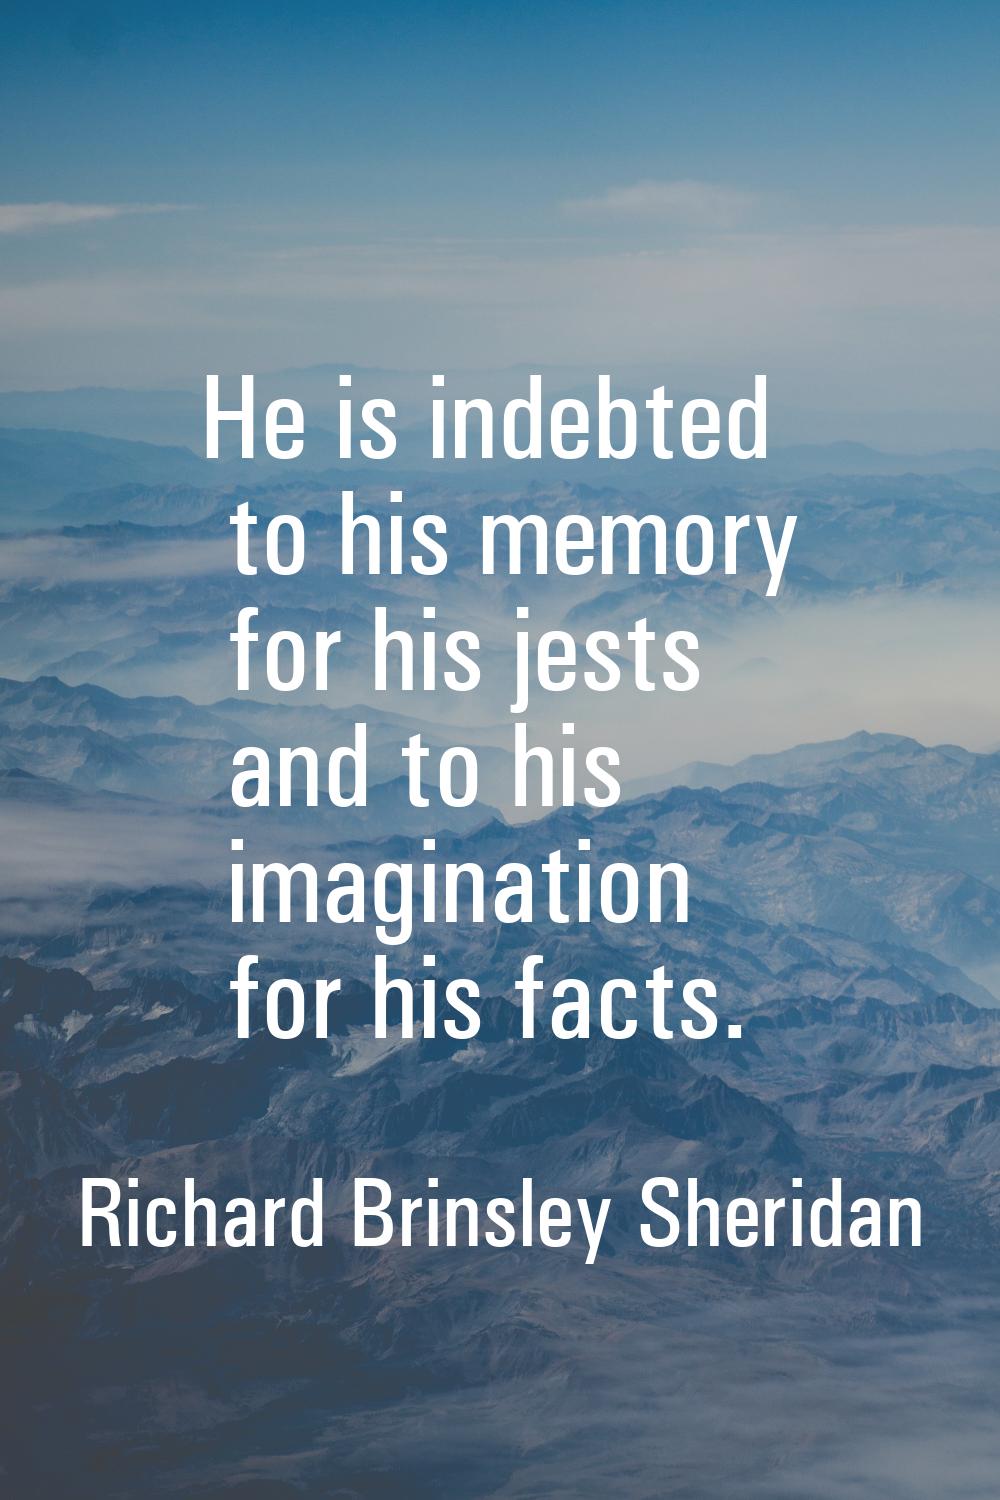 He is indebted to his memory for his jests and to his imagination for his facts.